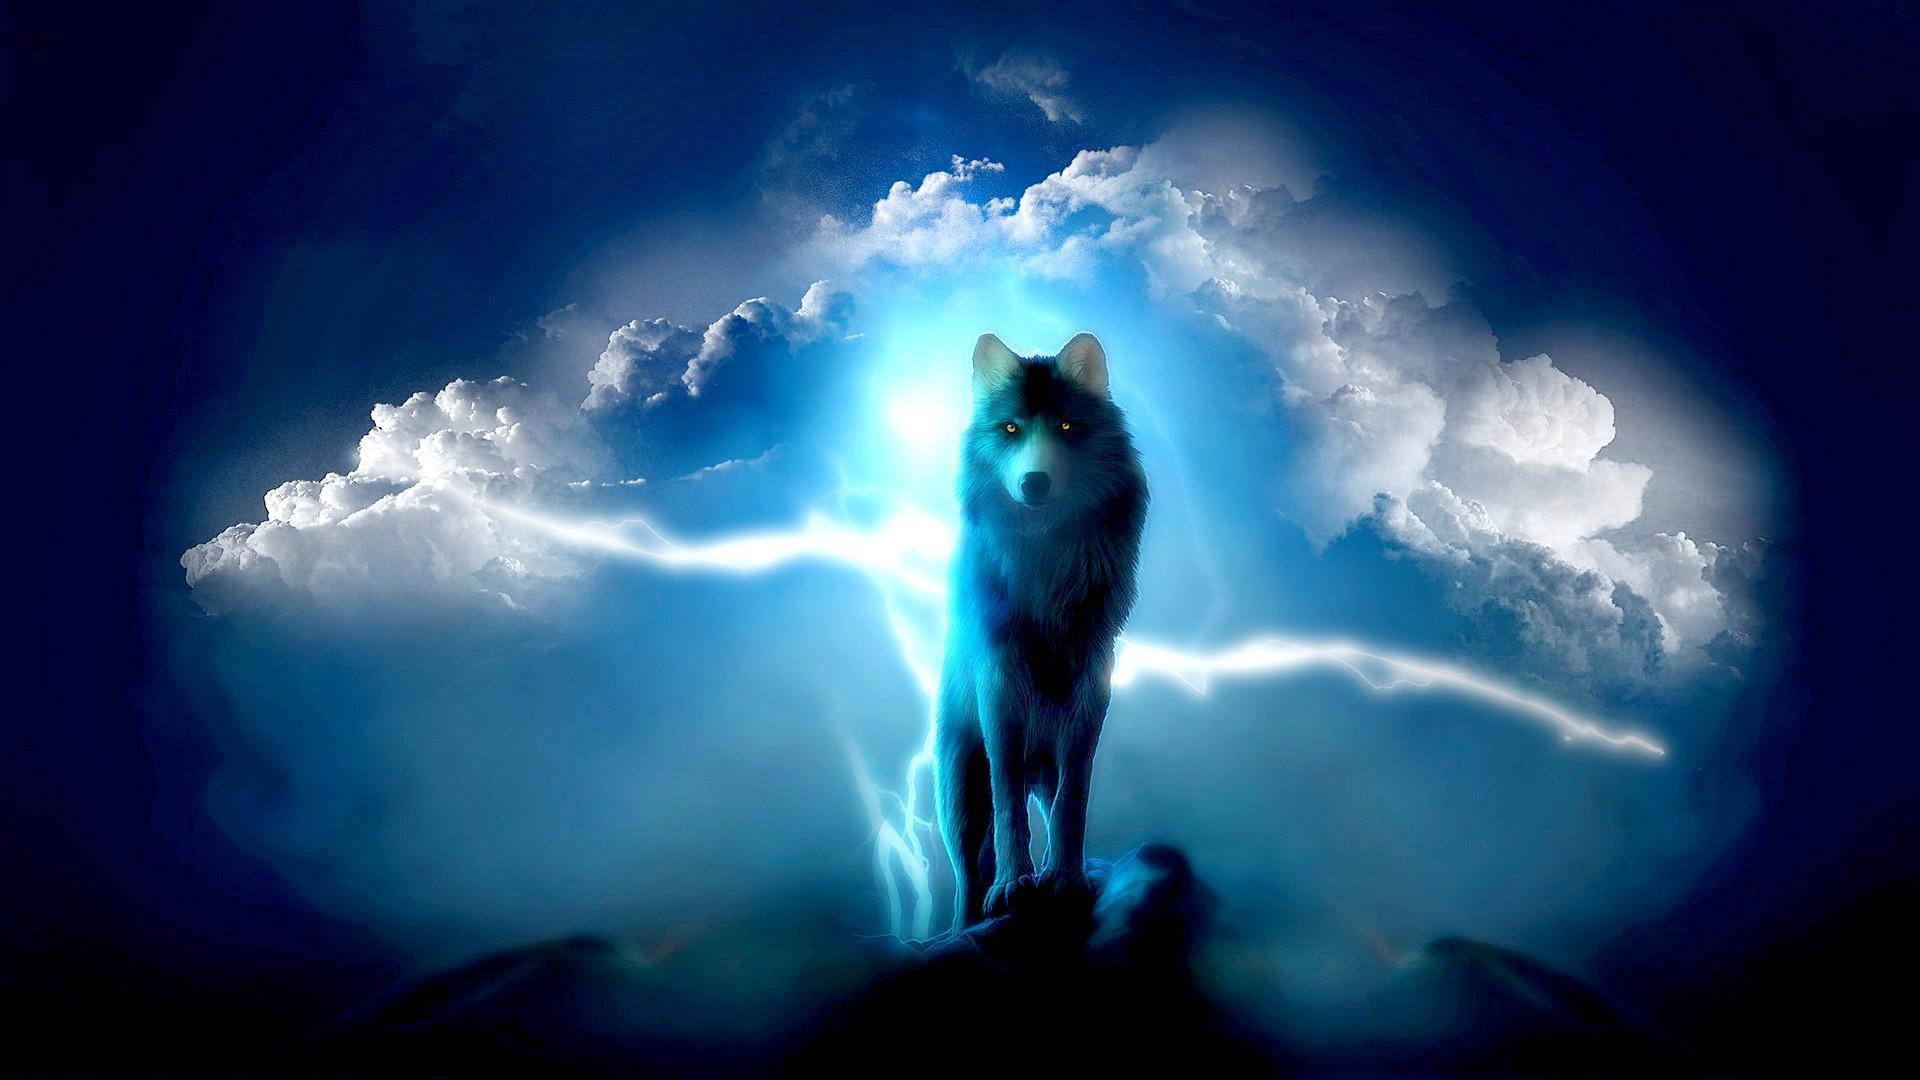 Lone Wolf Wallpapers - Wallpaper Cave - 1920 x 1080 jpeg 120kB